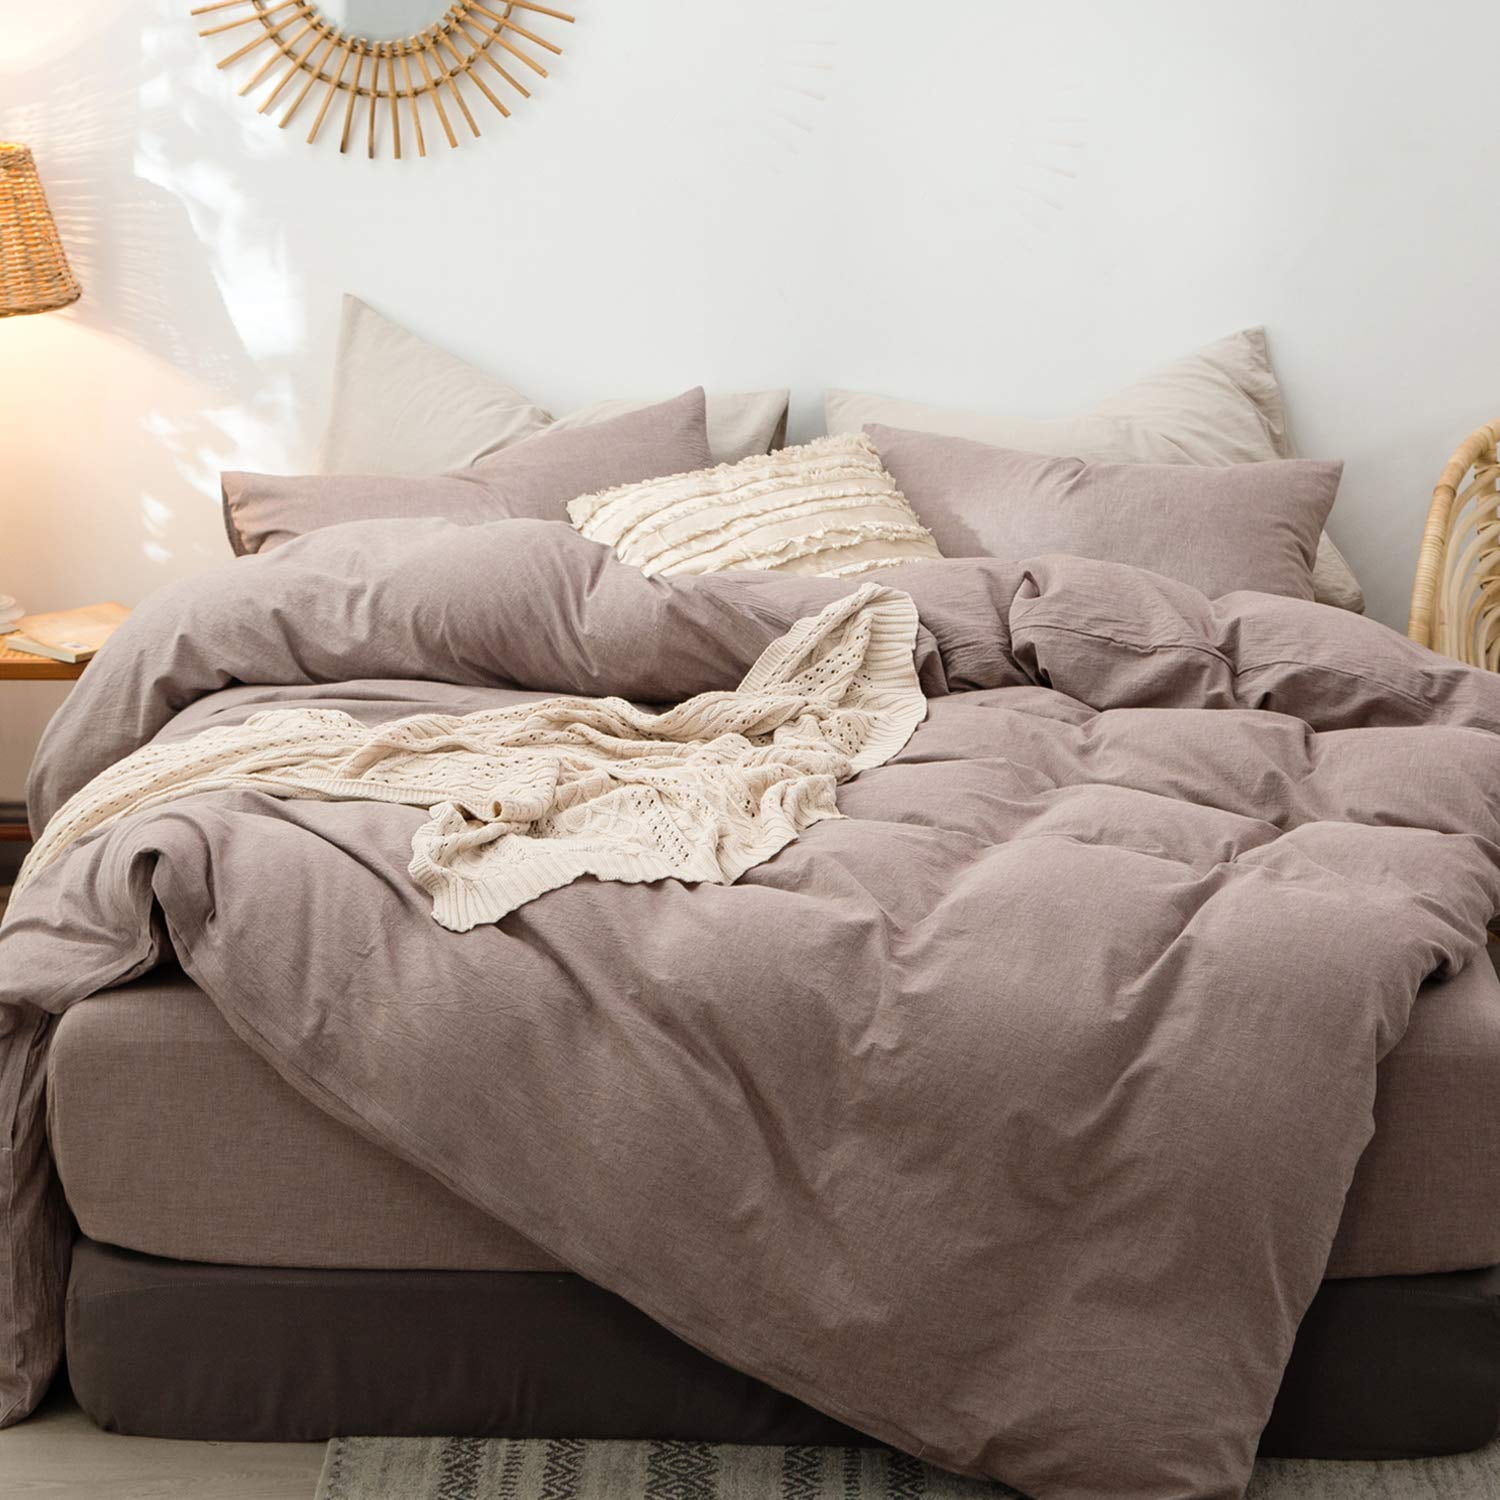 MooMee Bedding Duvet Cover Set 100% Washed Cotton Linen Like Textured  Breathable Durable Soft Comfy (Comforter Not Included) Mauve Brown, King  Size 